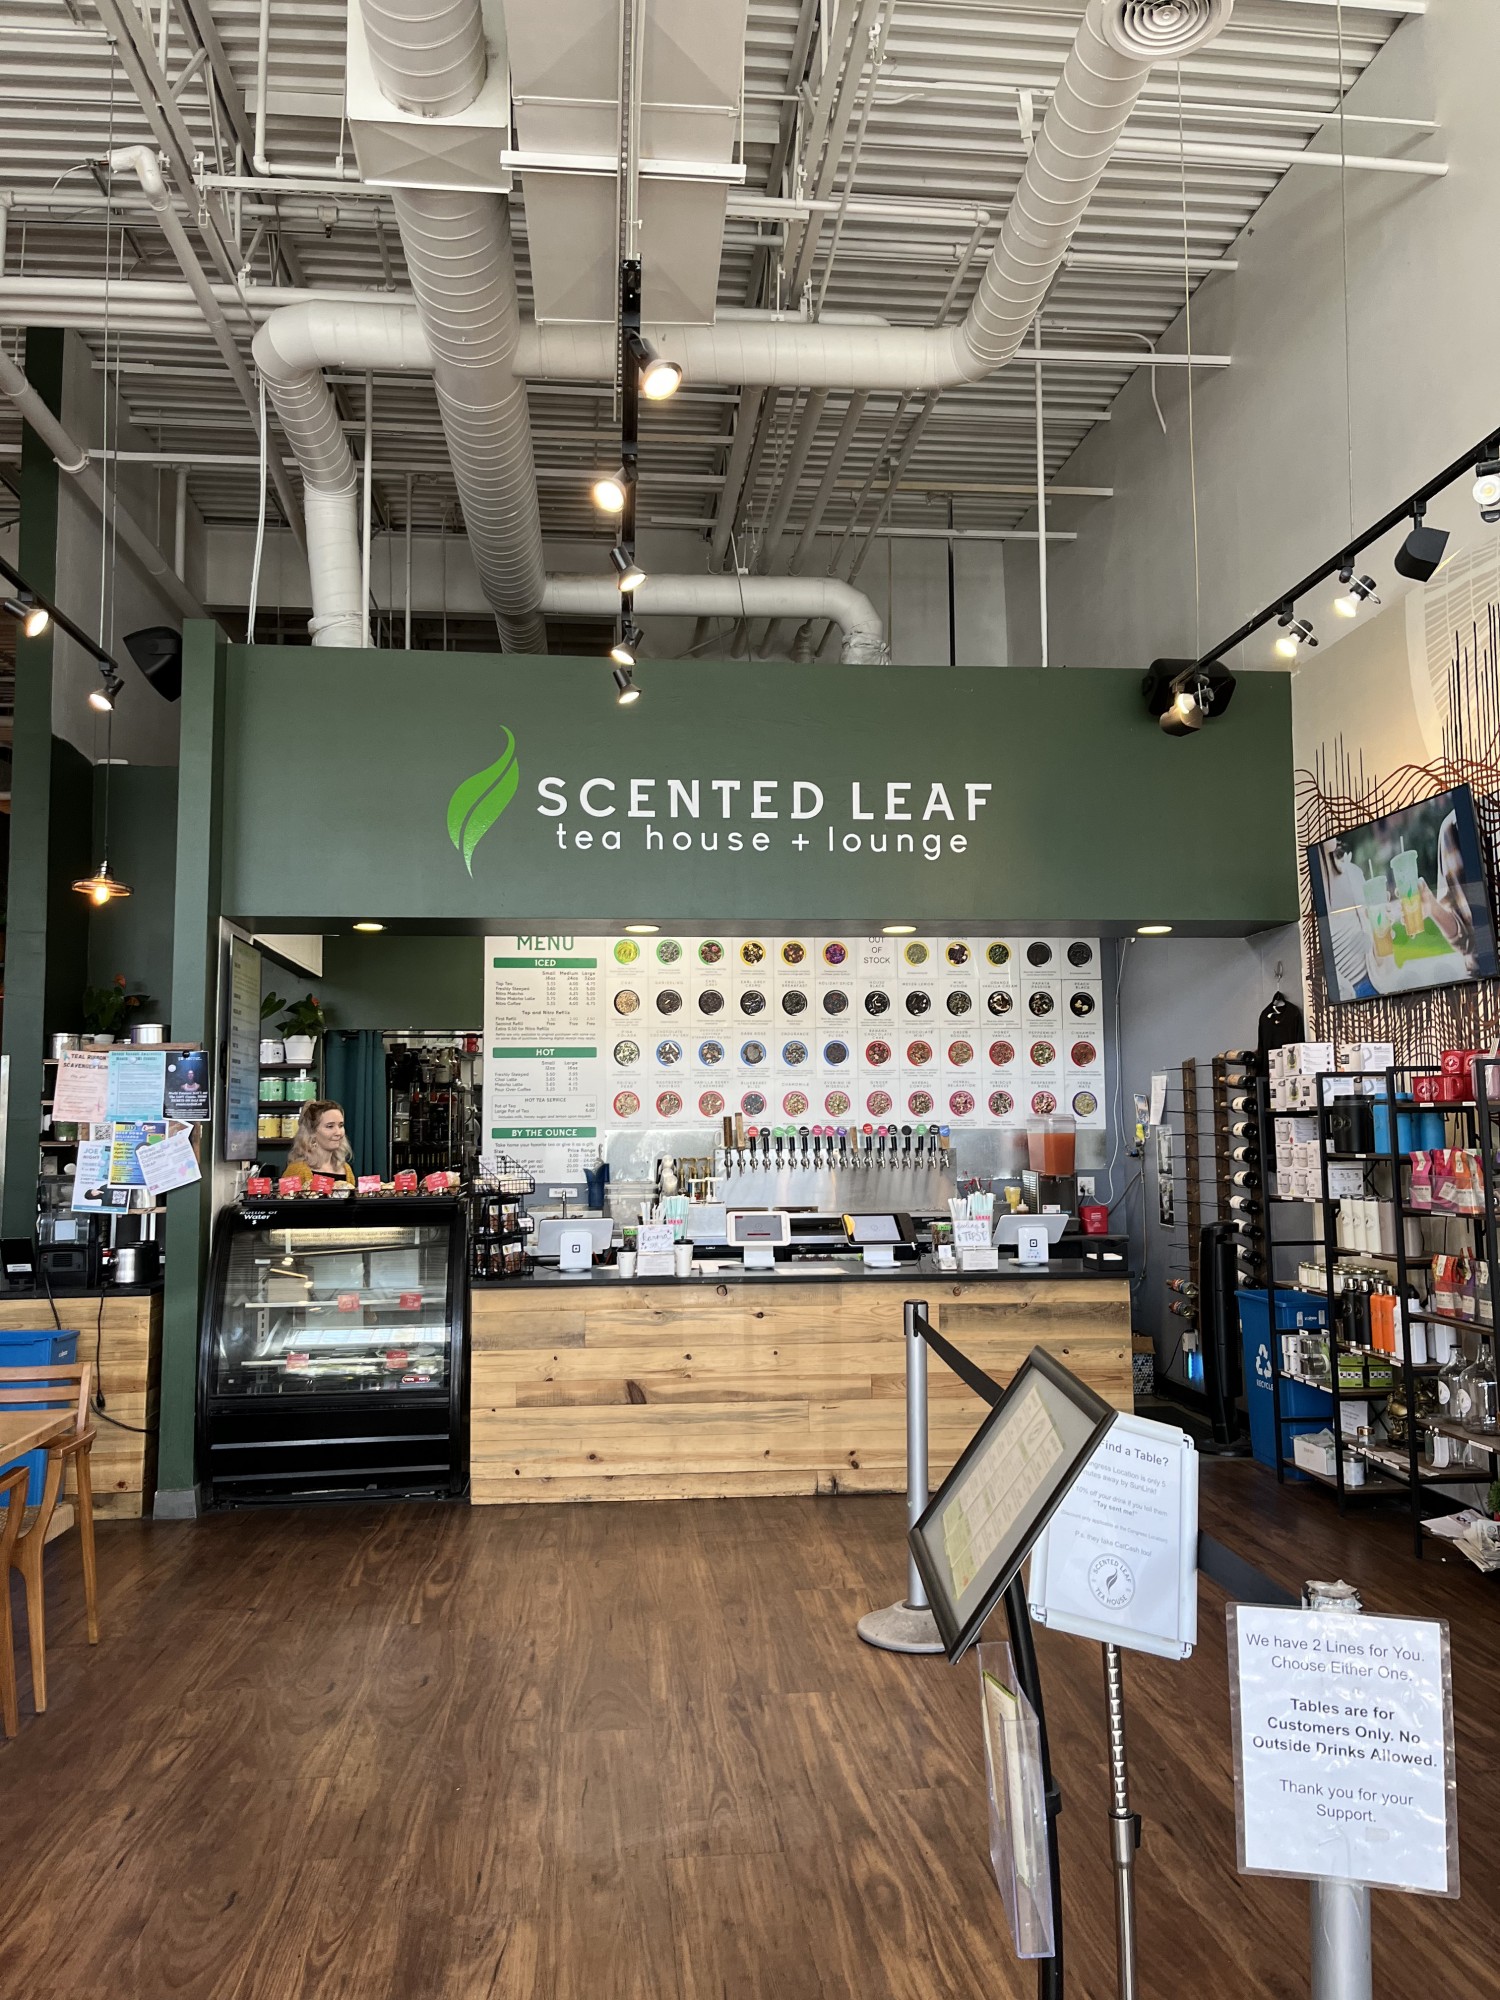 Scented Leaf offers a variety of different teas, including both caffeinated and decaffeinated options. Visit Scented Leaf in Main Gate Square to experience the energy and atmosphere for yourself!  